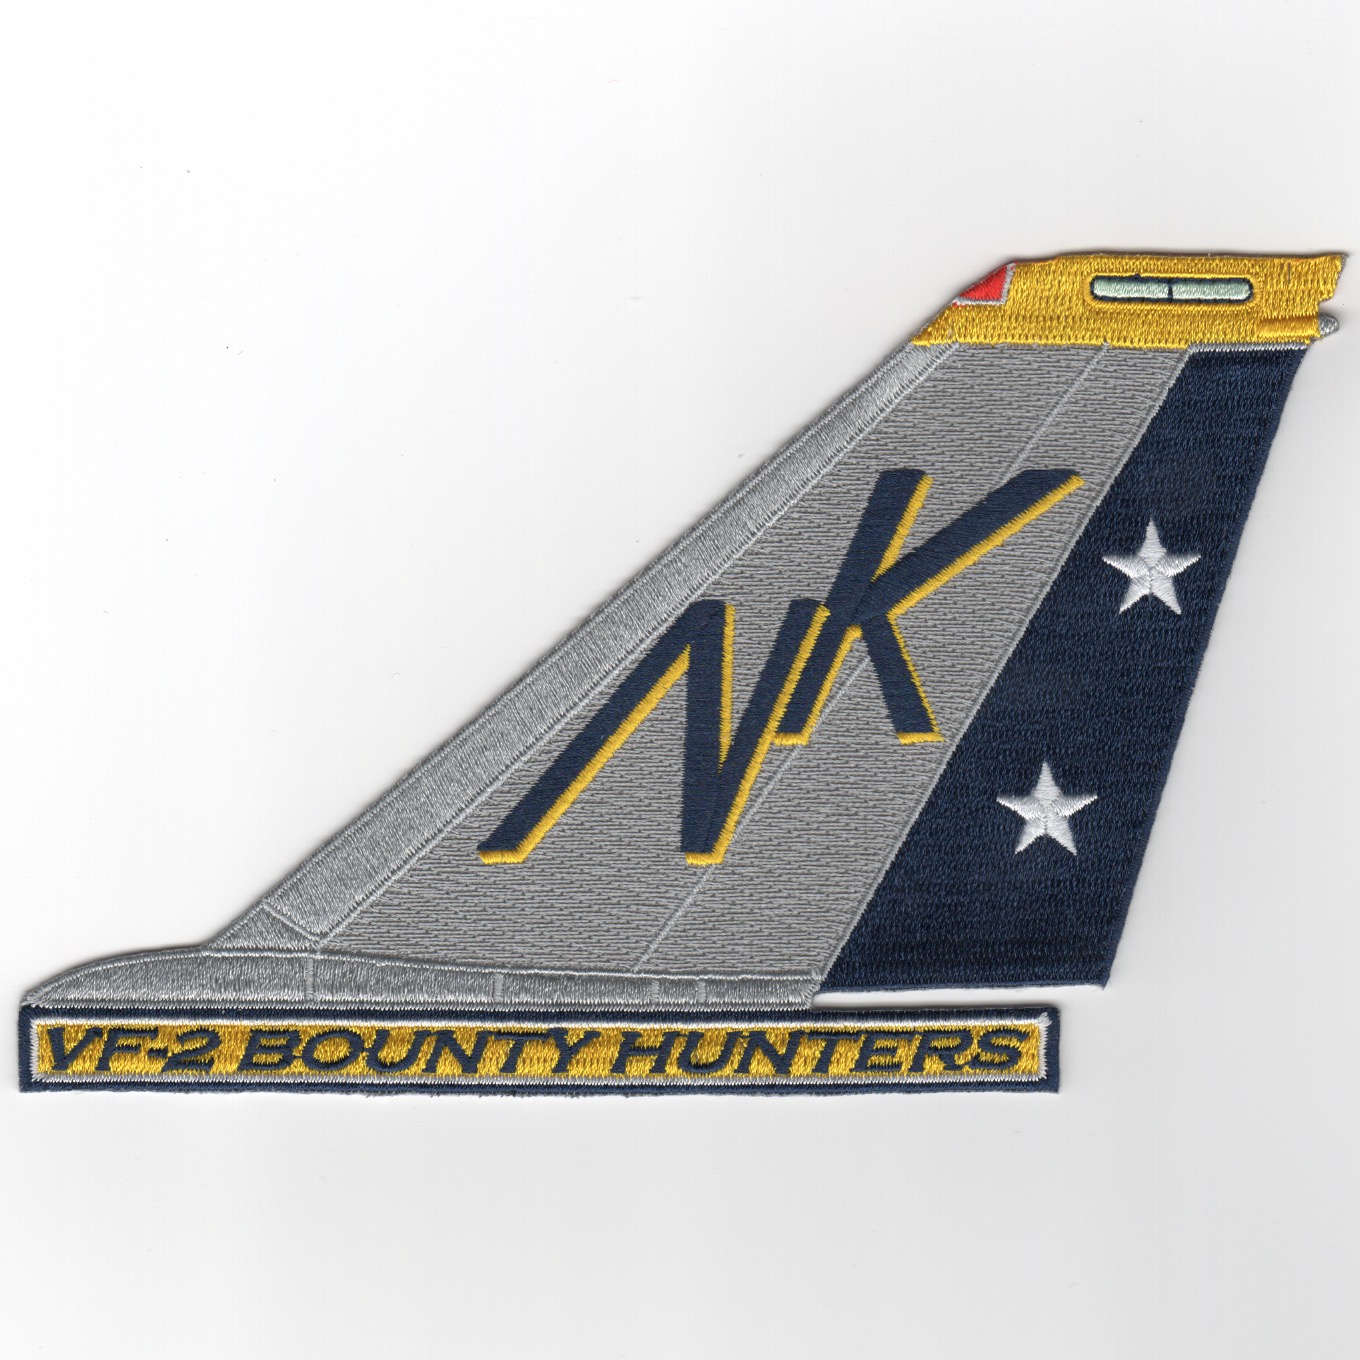 F-14 TAILFIN Patches!